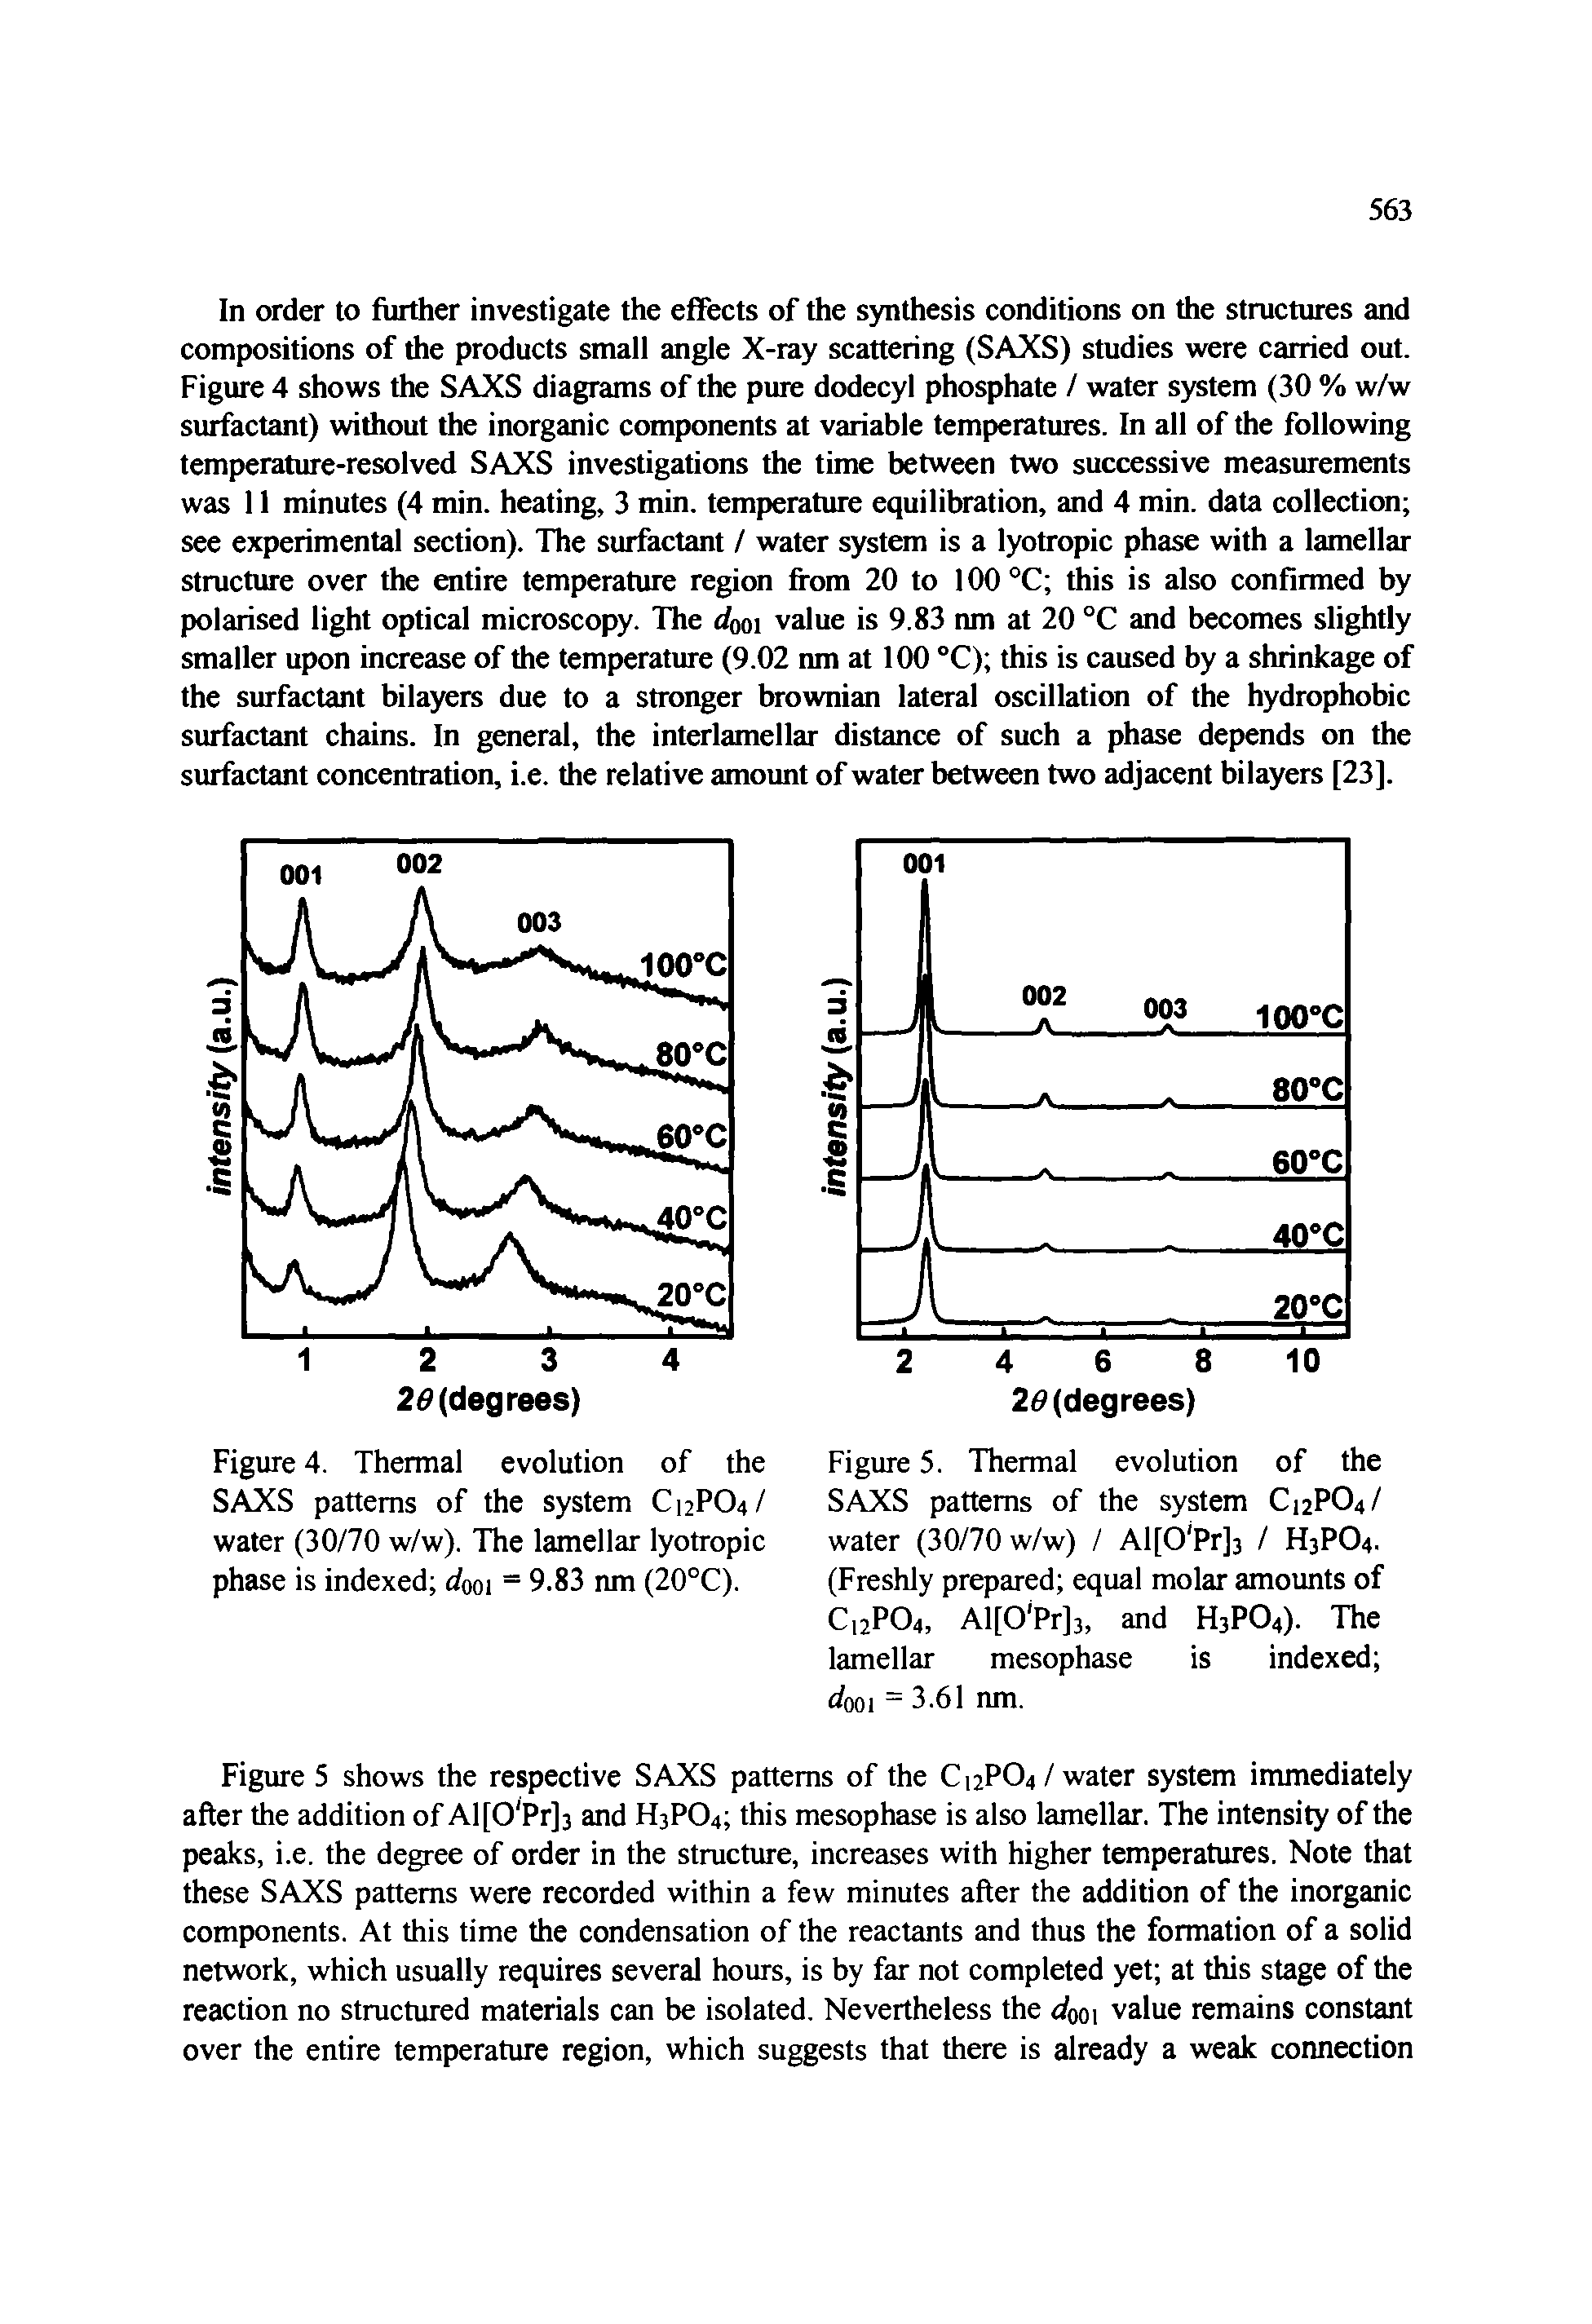 Figure 5. Thermal evolution of the SAXS patterns of the system C12PO4/ water (30/70 w/w) / Al[0 Pr]3 / H3PO4. (Freshly prepared equal molar amounts of C12P04, Al[0 Pr]3, and H3PO4). The lamellar mesophase is indexed dooi = 3.61 nm.